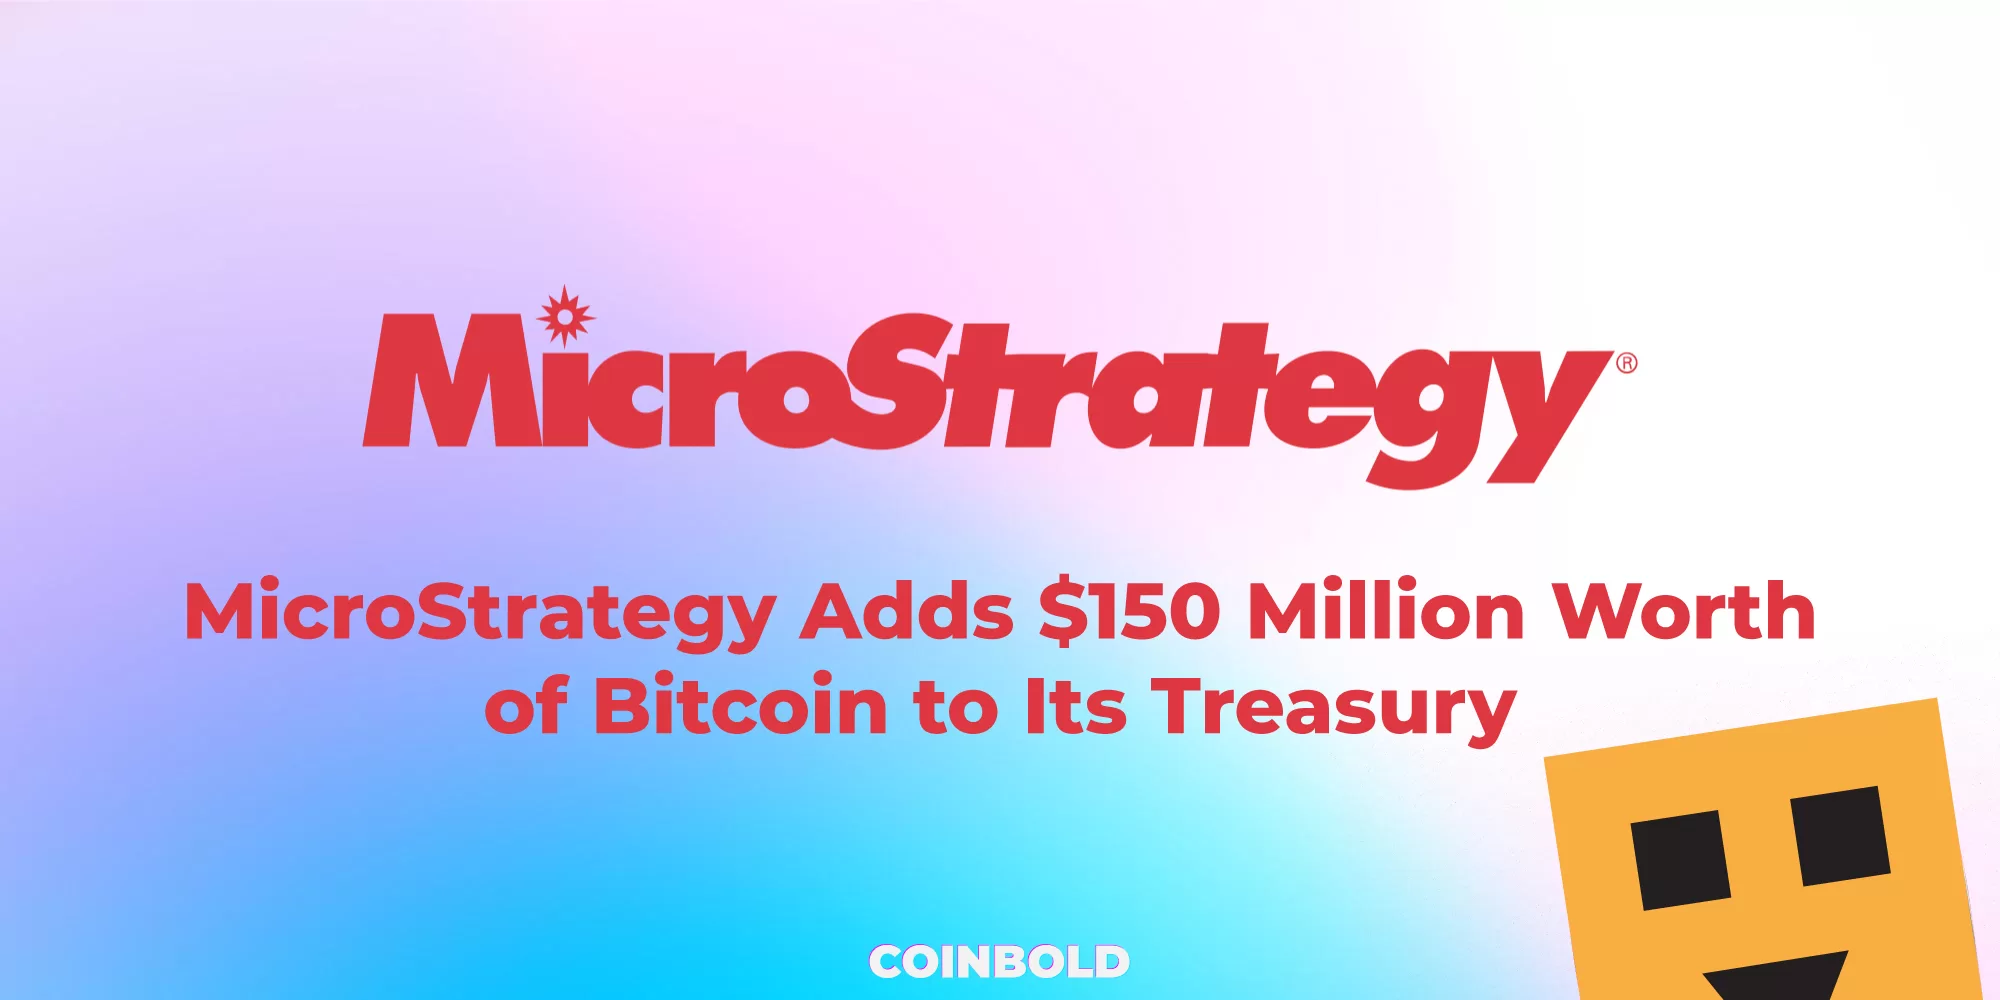 MicroStrategy Adds $150 Million Worth of Bitcoin to Its Treasury